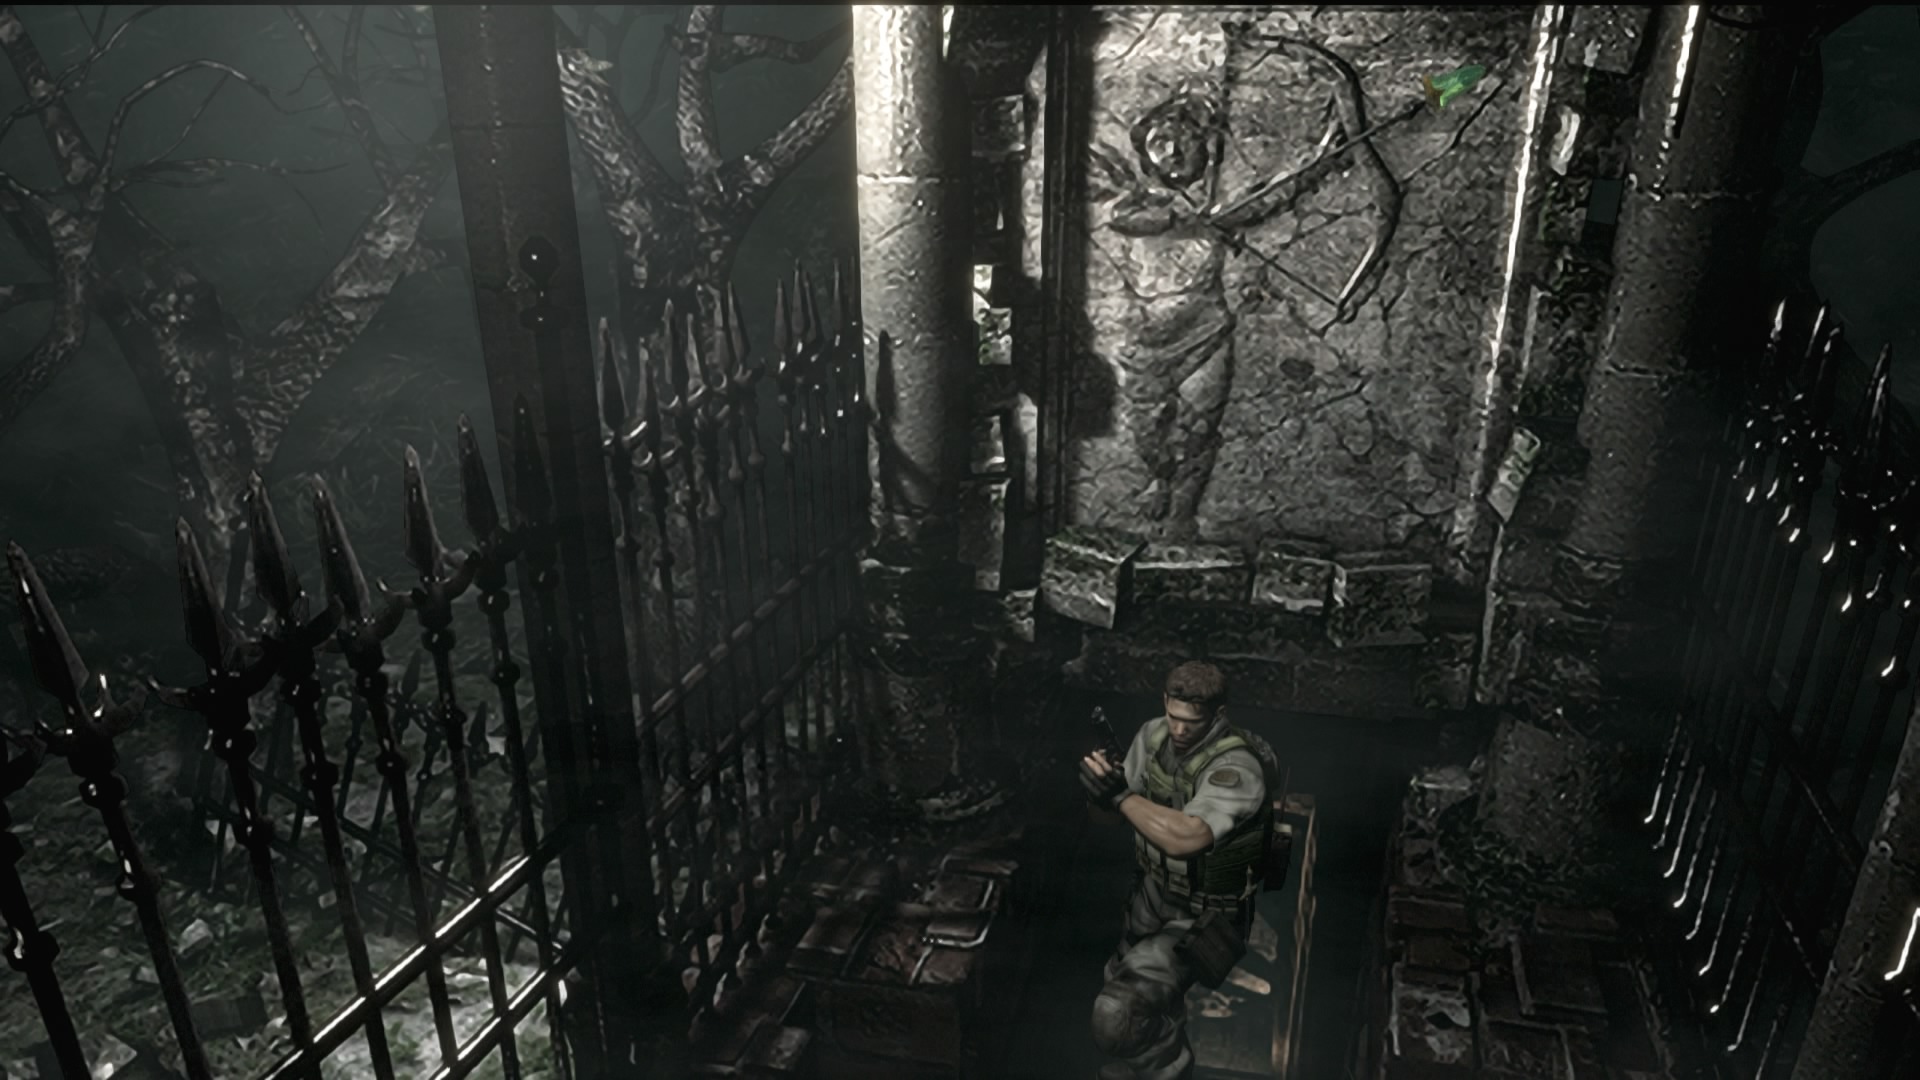 Resident Evil HD Remaster PS4 Vs. Xbox One Comparison: Solid Port